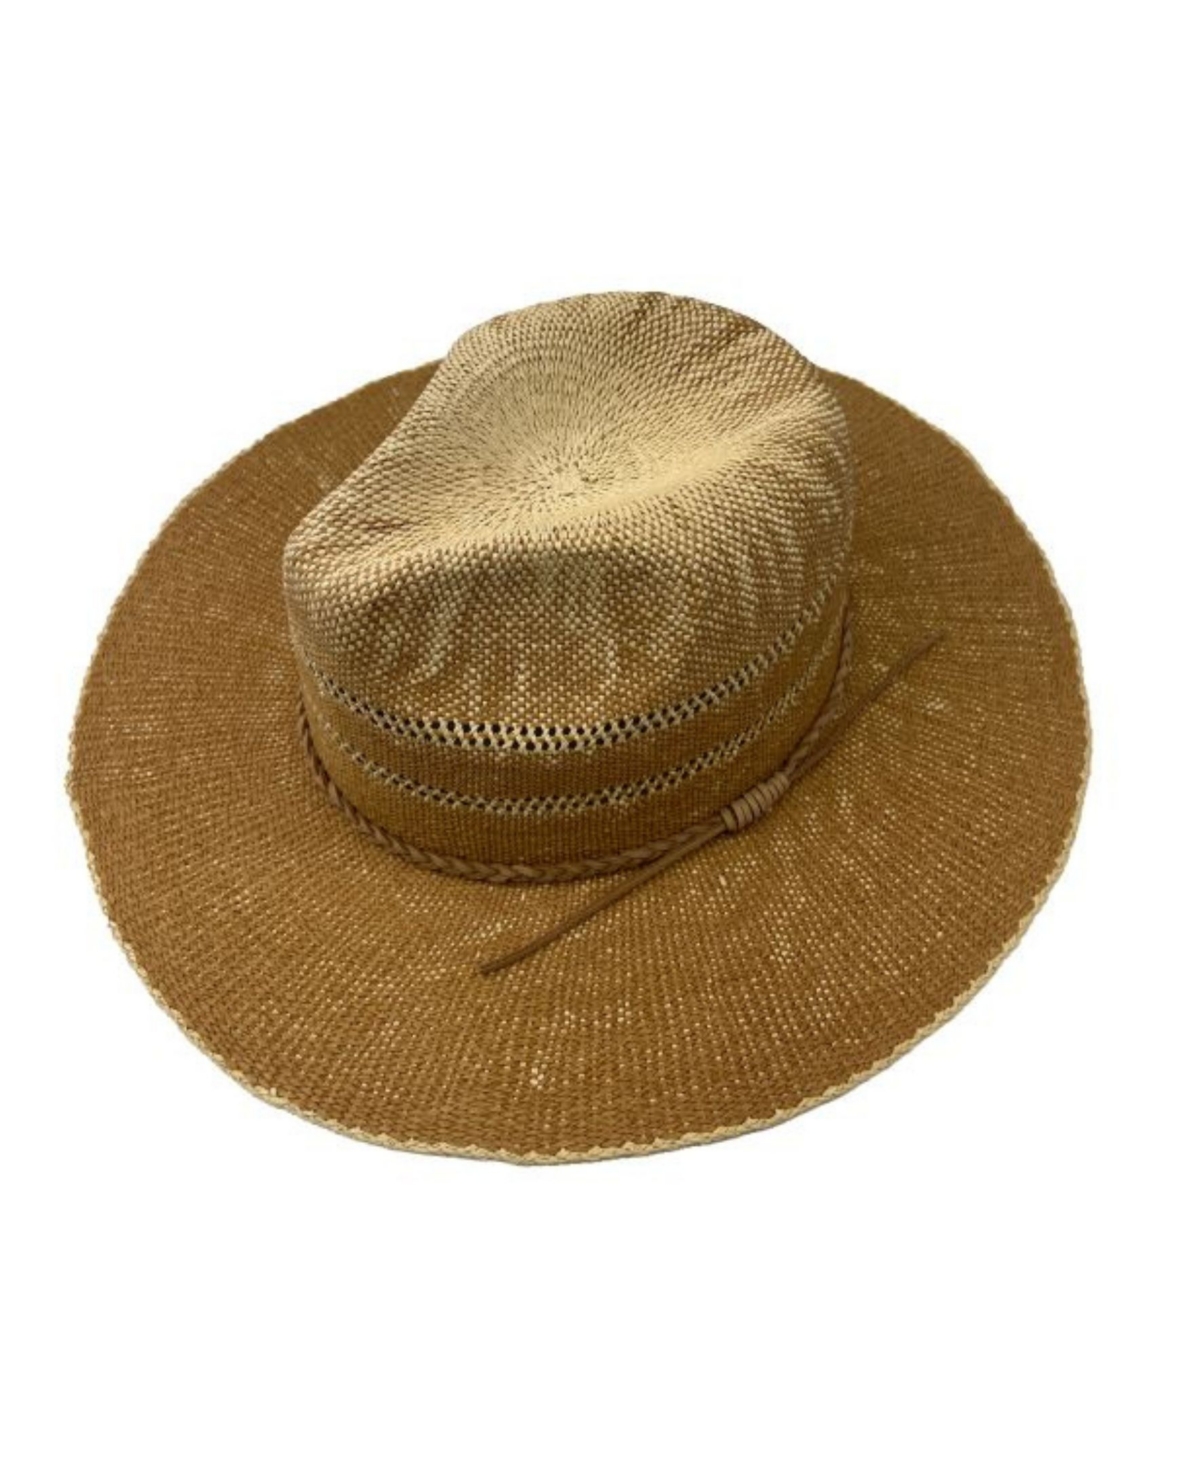 Faux Suede Braided Trim with Straw Panama Hat - Taupe